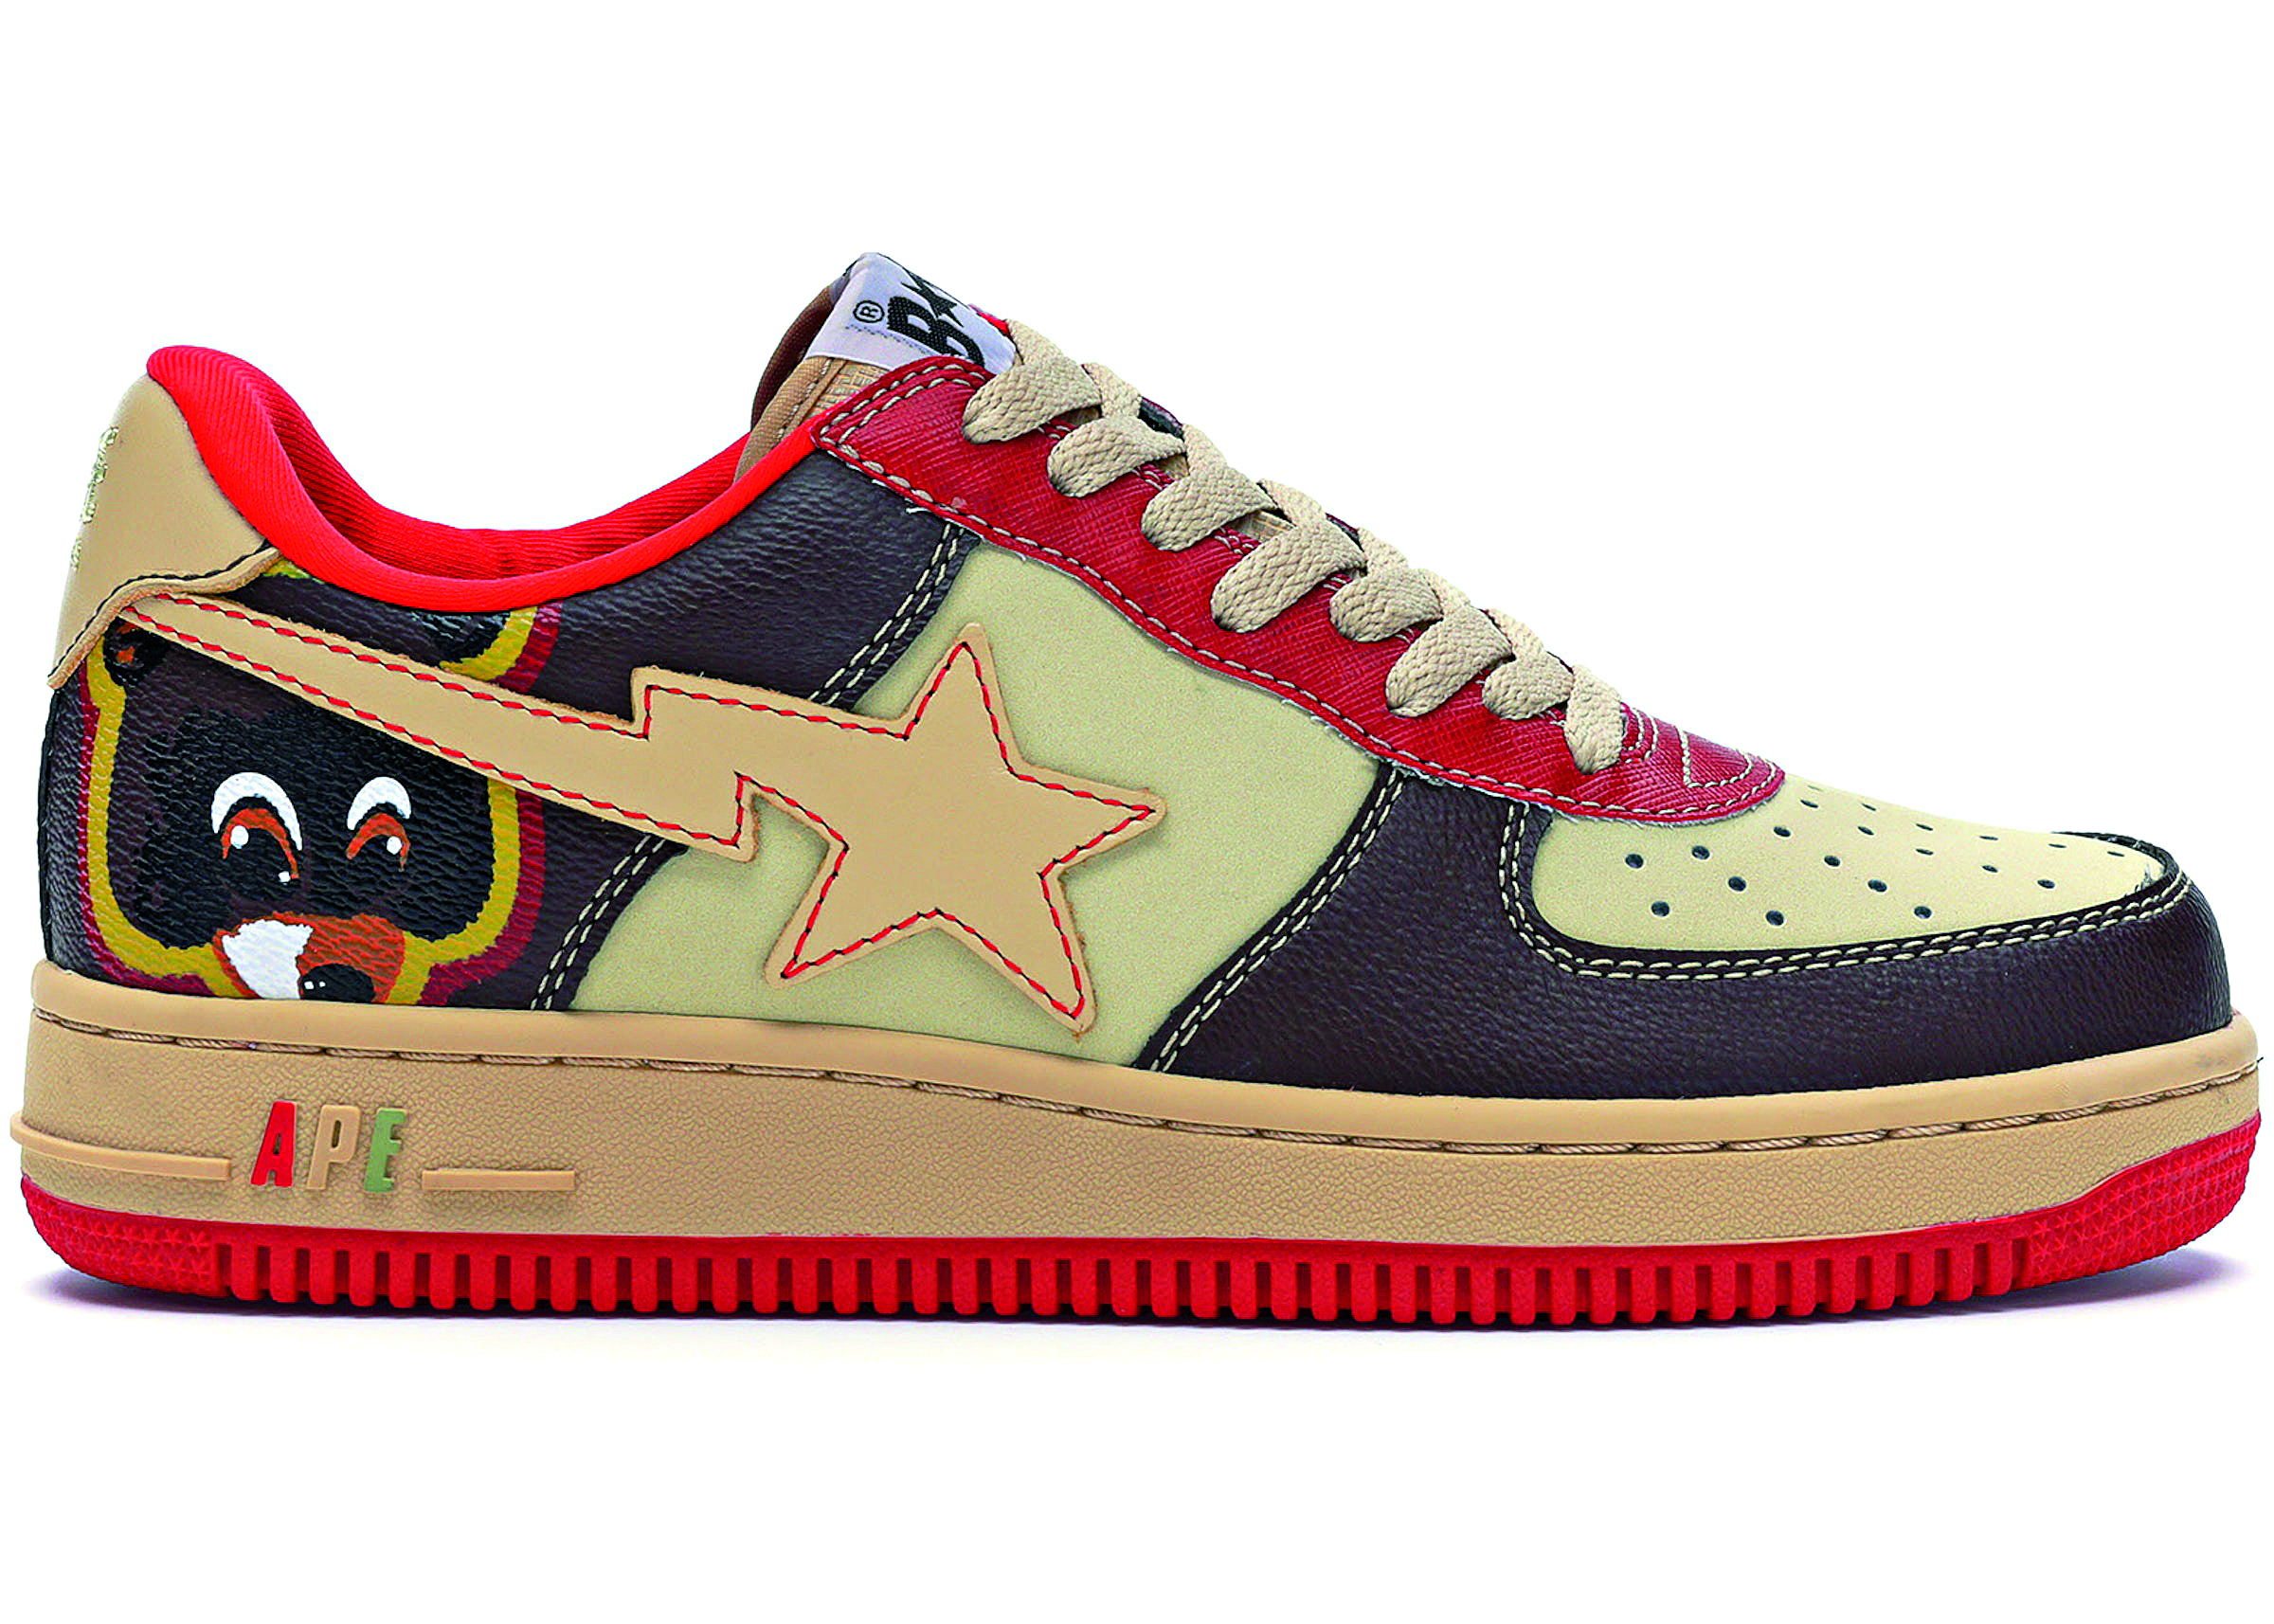 Celebrating 50 Years of Hip-Hop with the Kicks That Have Impacted the Rap Game